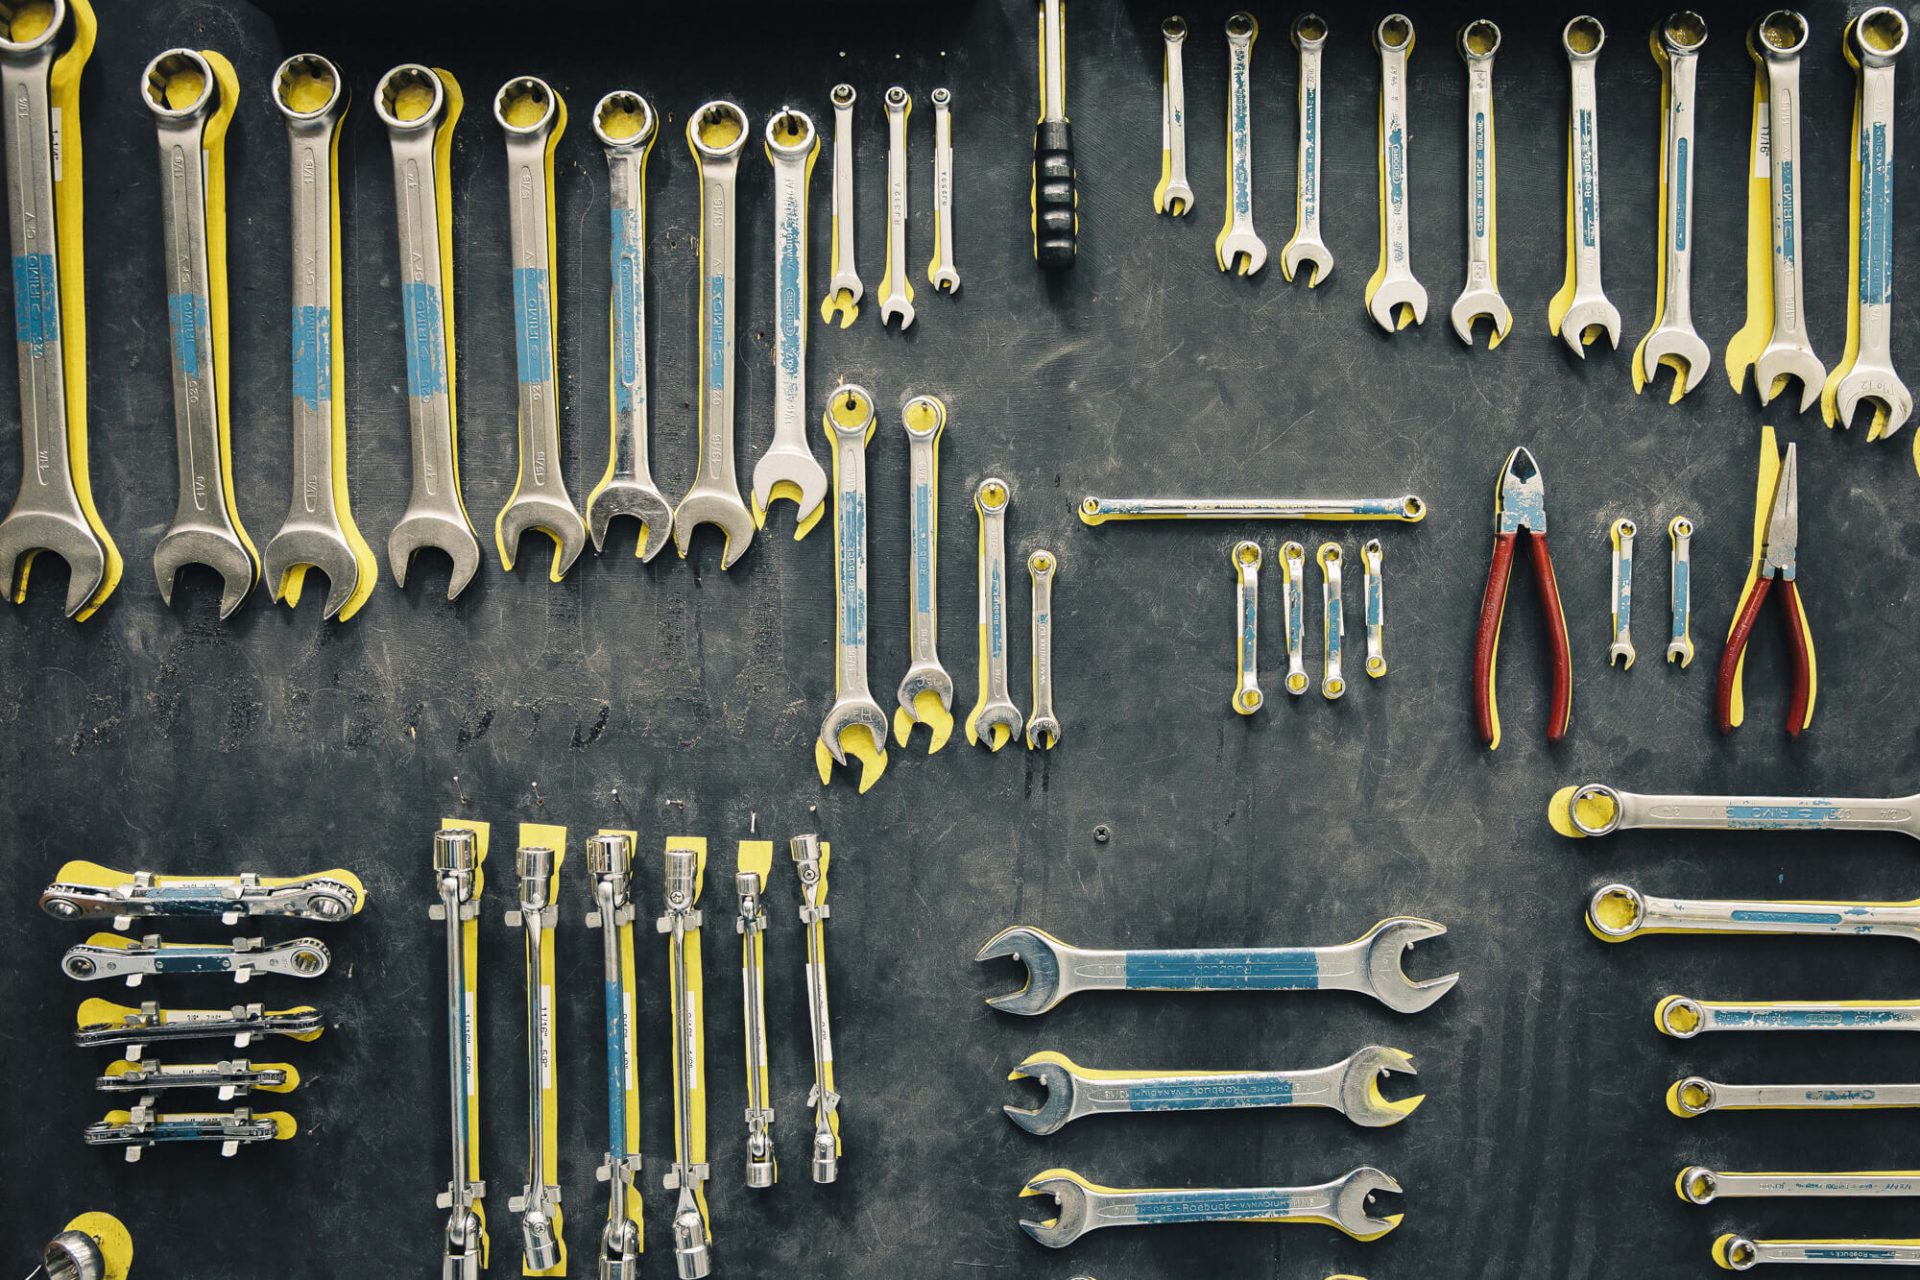 Wrenches and pliers hang up on a wall - tools for engineering courses in Bristol